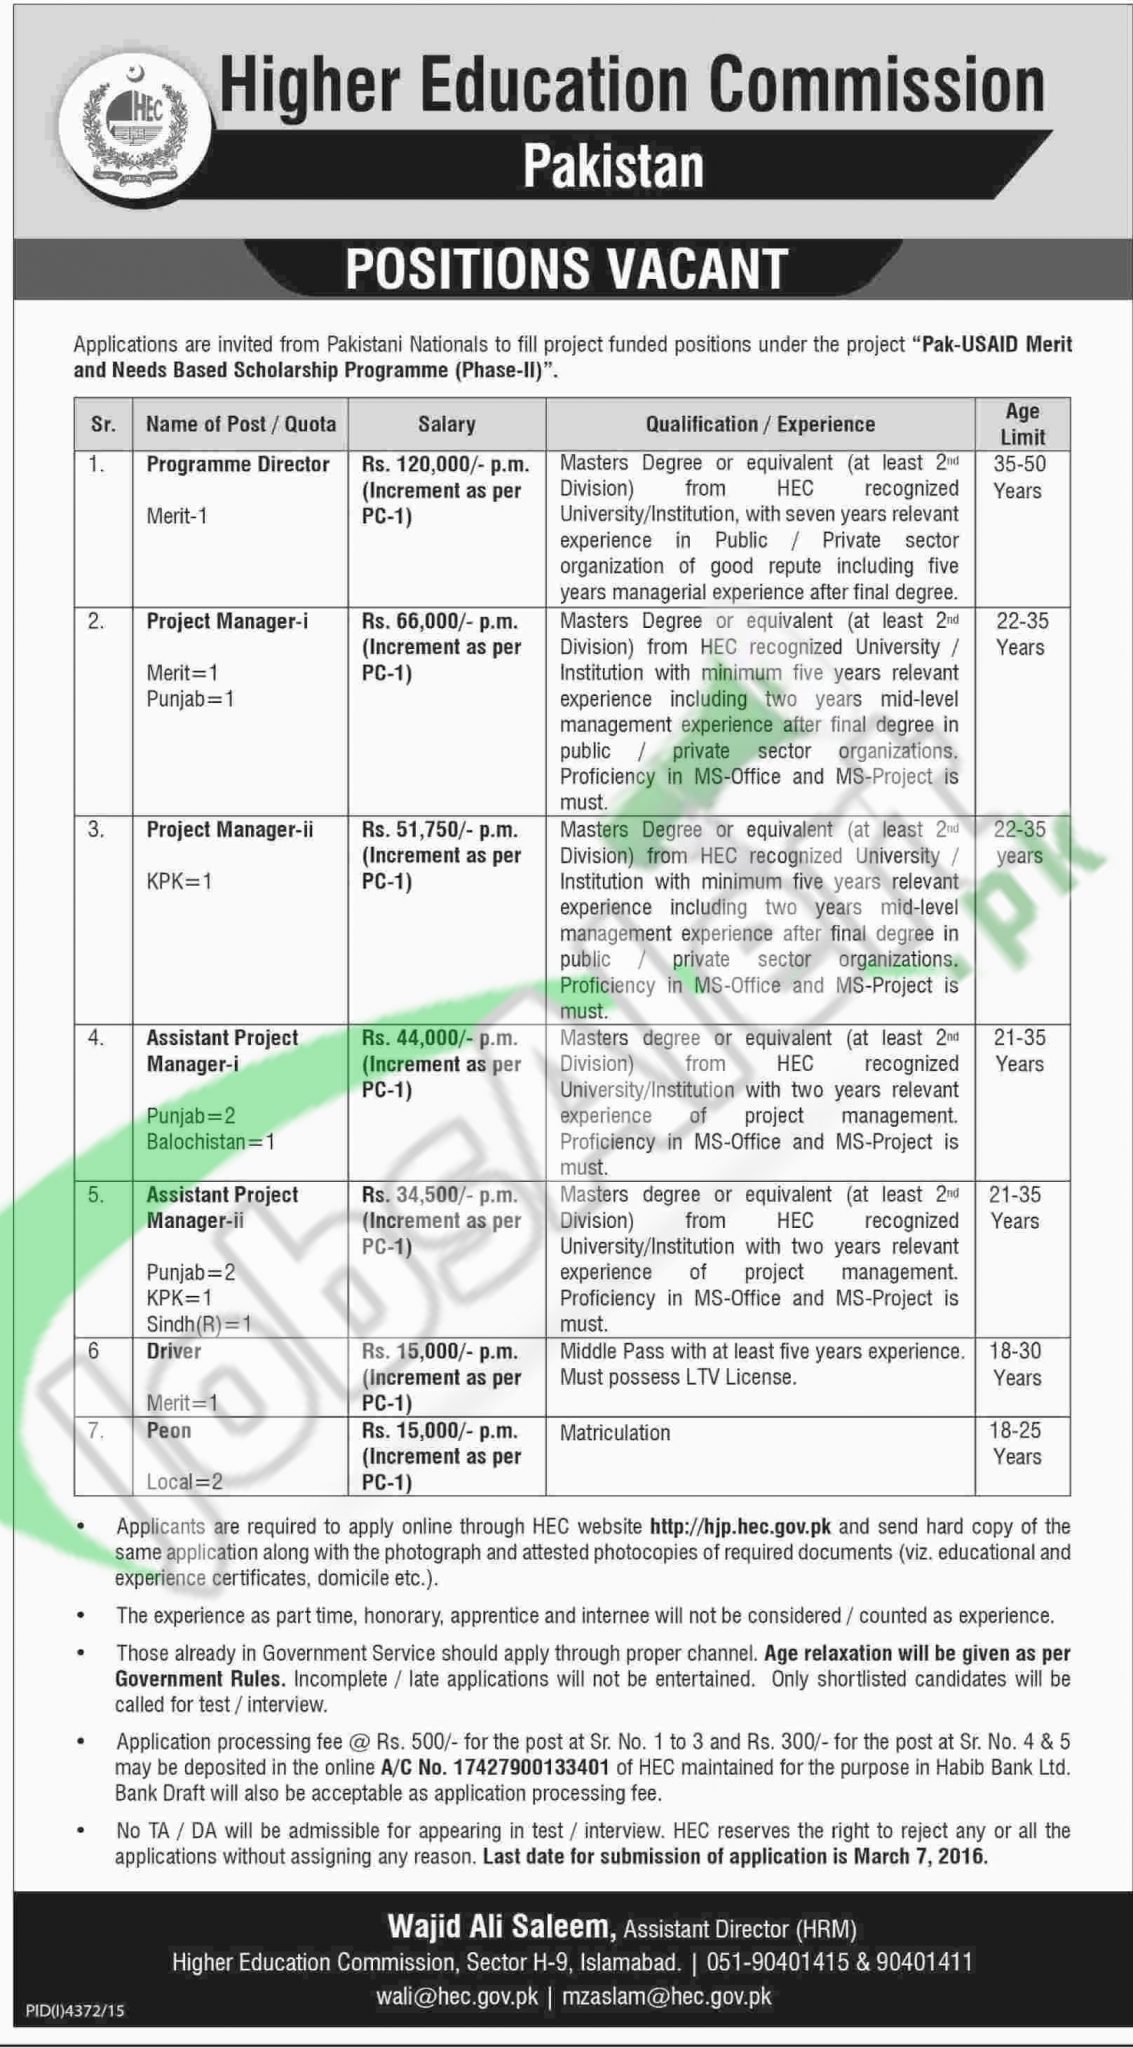 Employment Offers in Higher Education Commission February/March 2016 Apply Online in Sindh, Balochistan, KPK